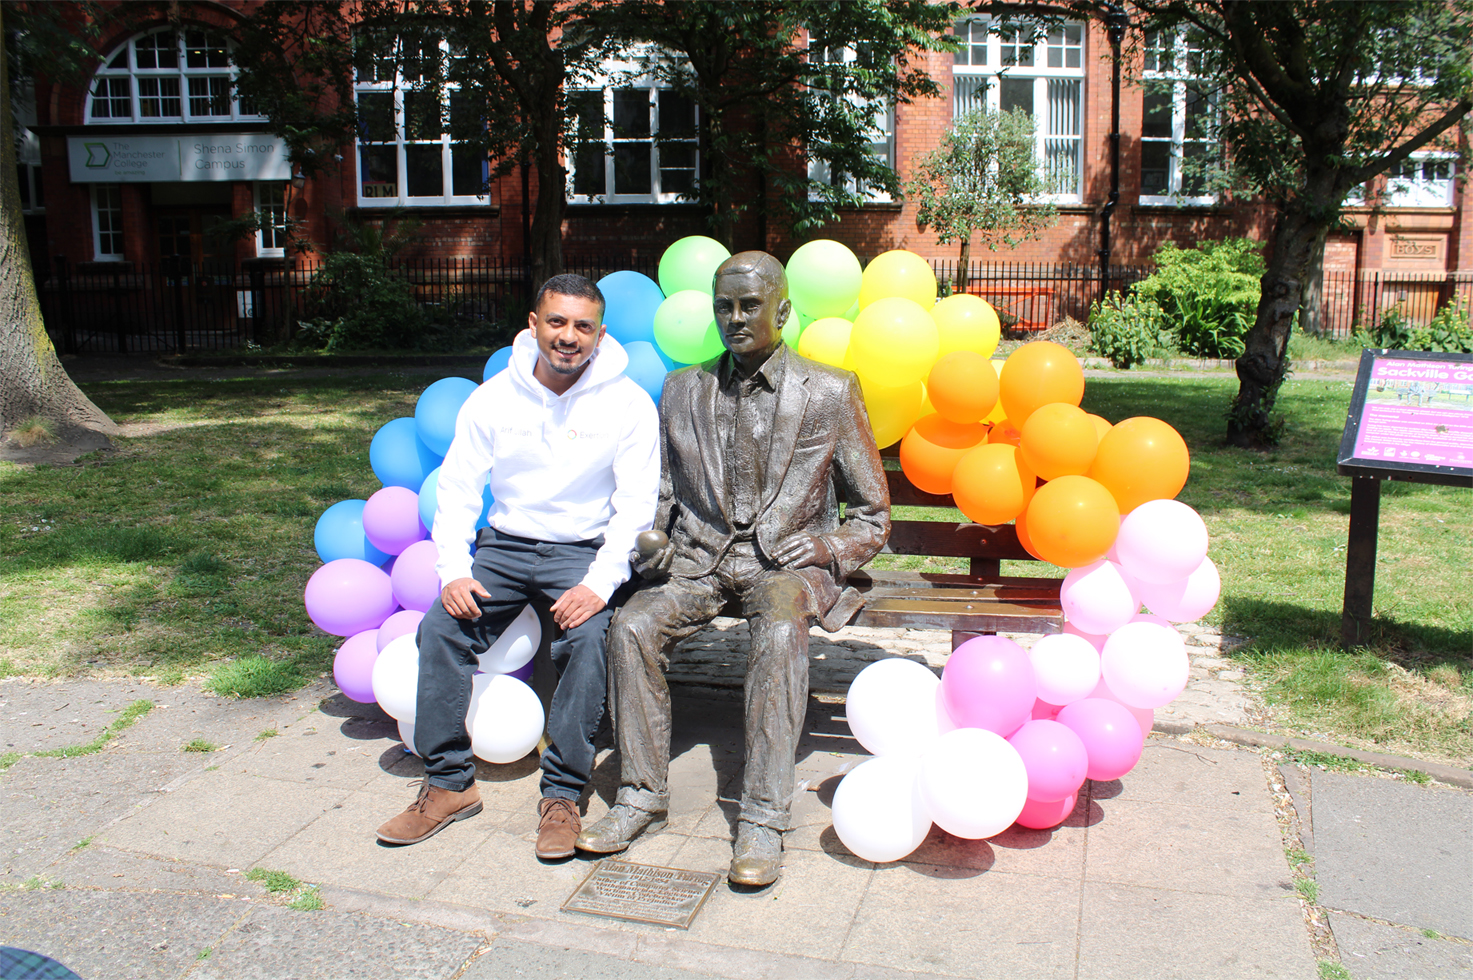 Our completed arch of balloons colour coordinated with the colours of the rainbow wrapped around Alan Turing's bench, pictured with Arif.